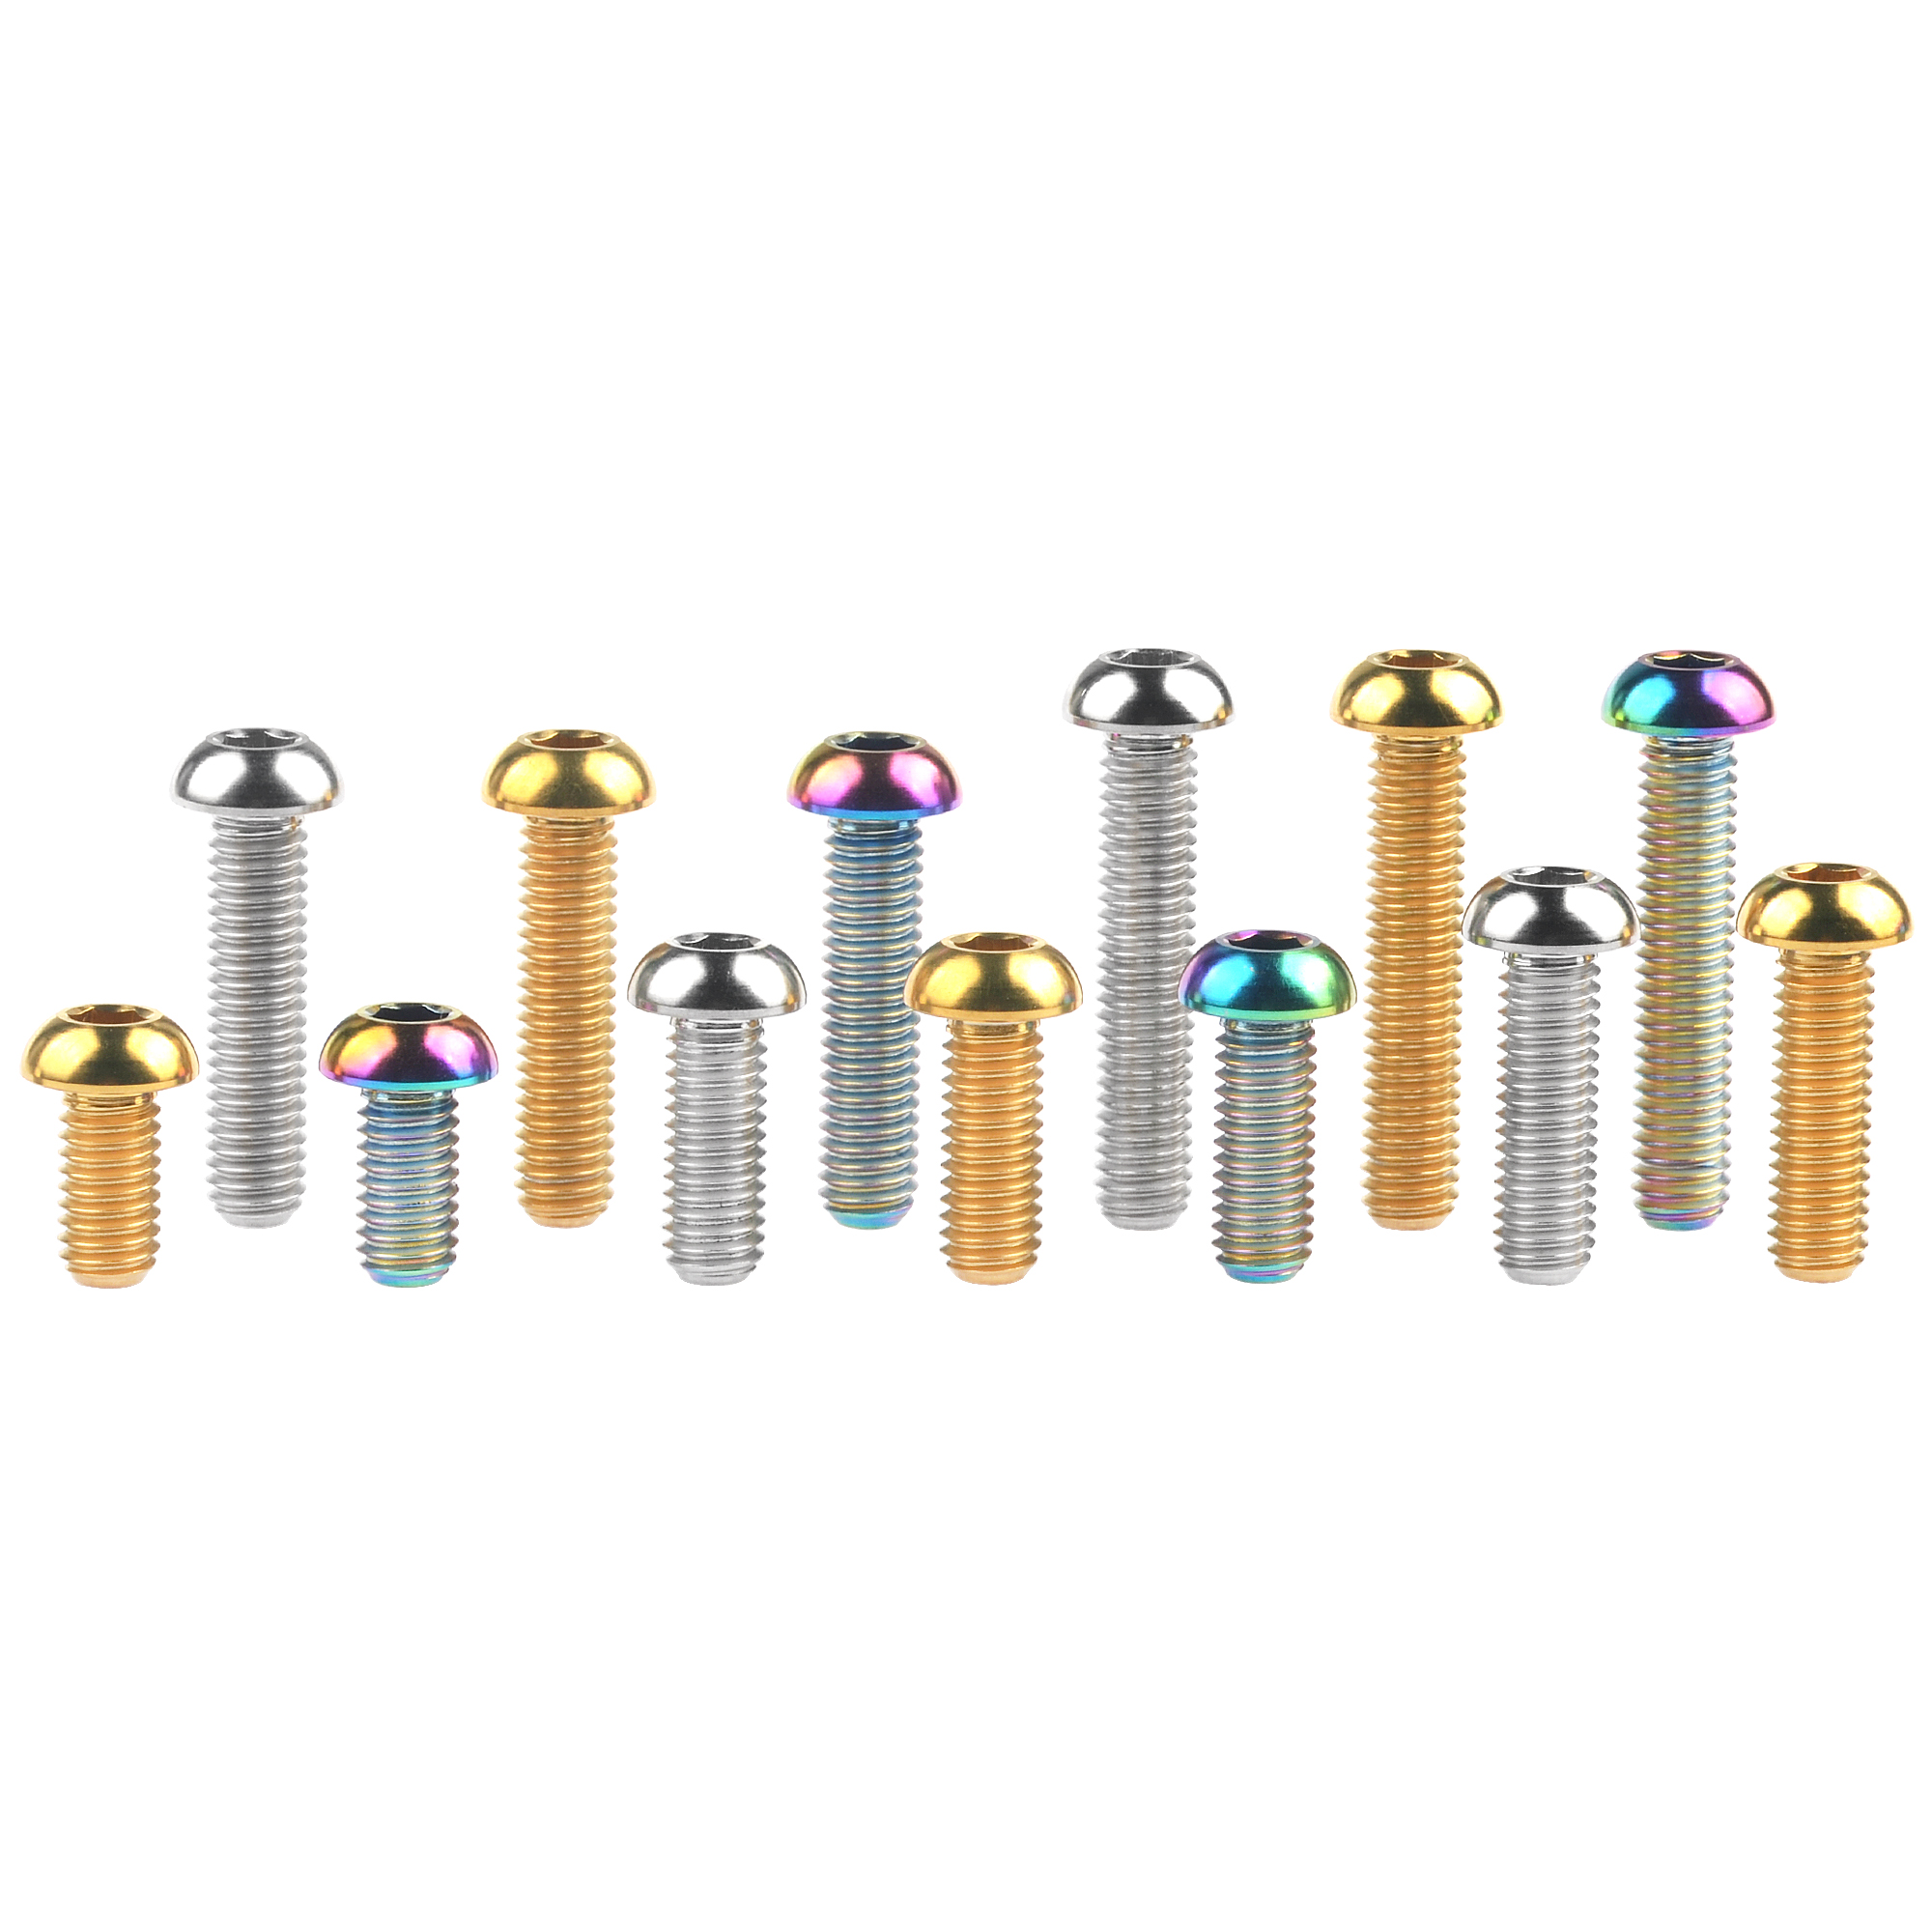 Titanium Bolt M8 X 15 20 25 30 35 40Mm Key Button Head Screw for Bicycle Motorcycle Brake Ranibow M8 35mm 